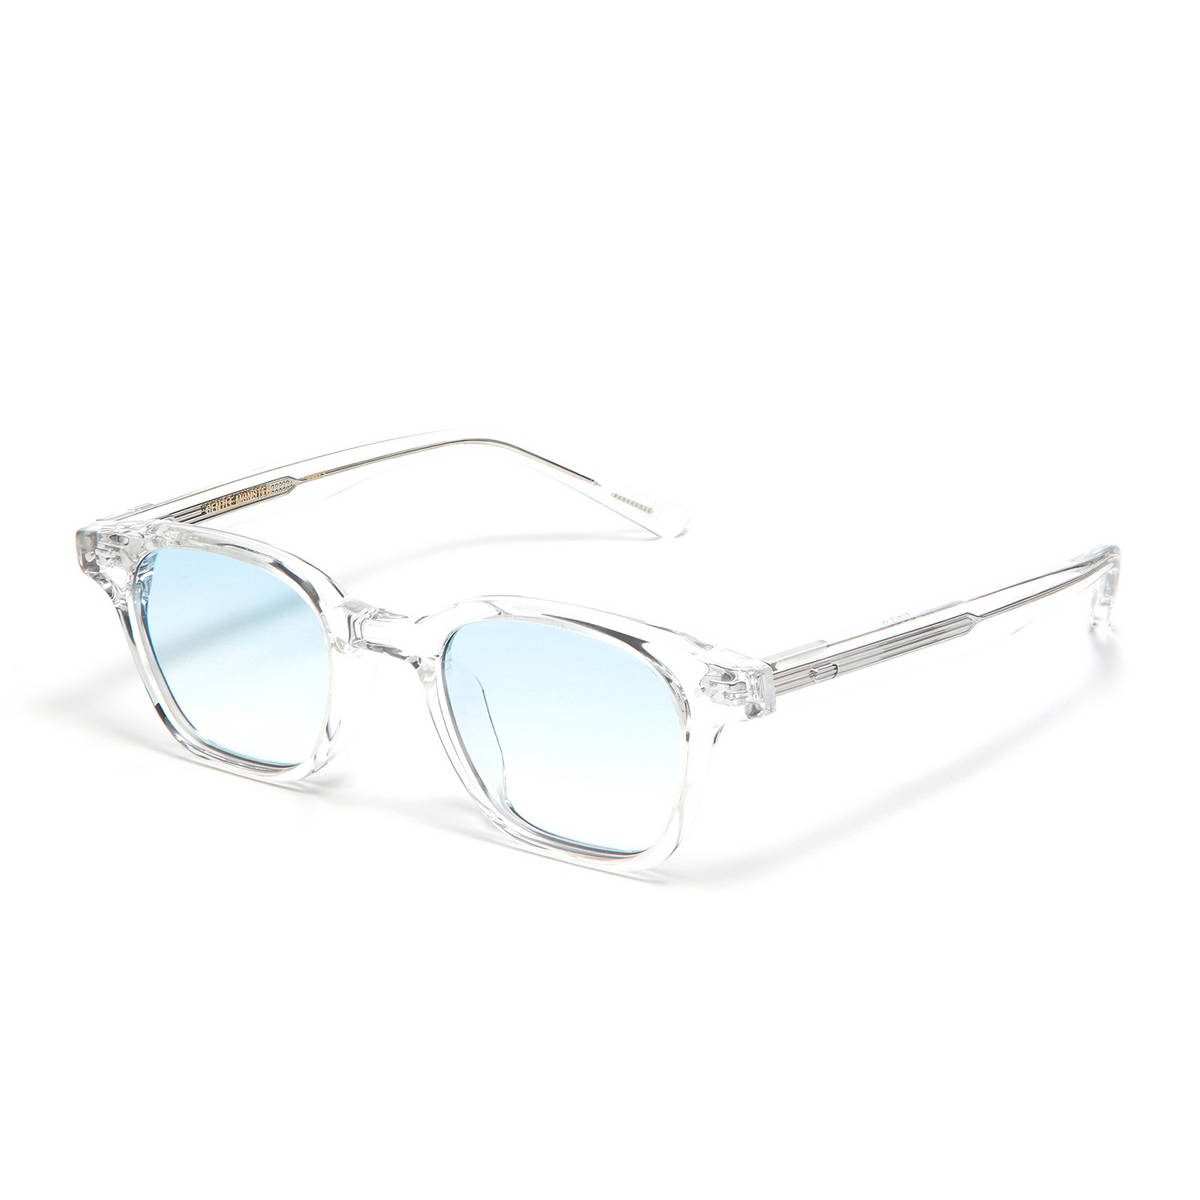 Gentle Monster® Square Eyeglasses: Cato color Clear C1 - three-quarters view.